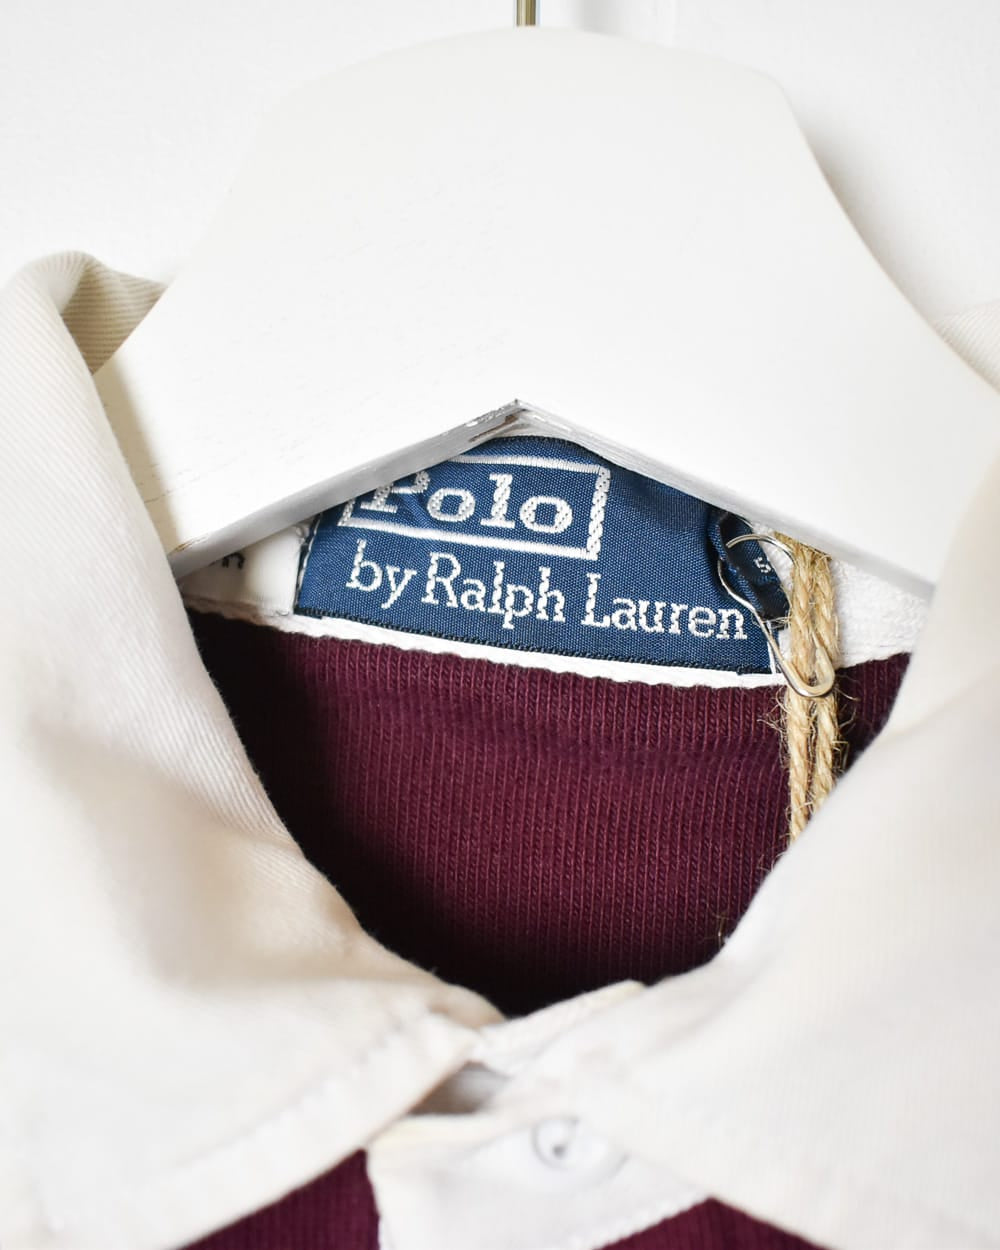 Maroon Polo Ralph Lauren Rugby Shirt - Small